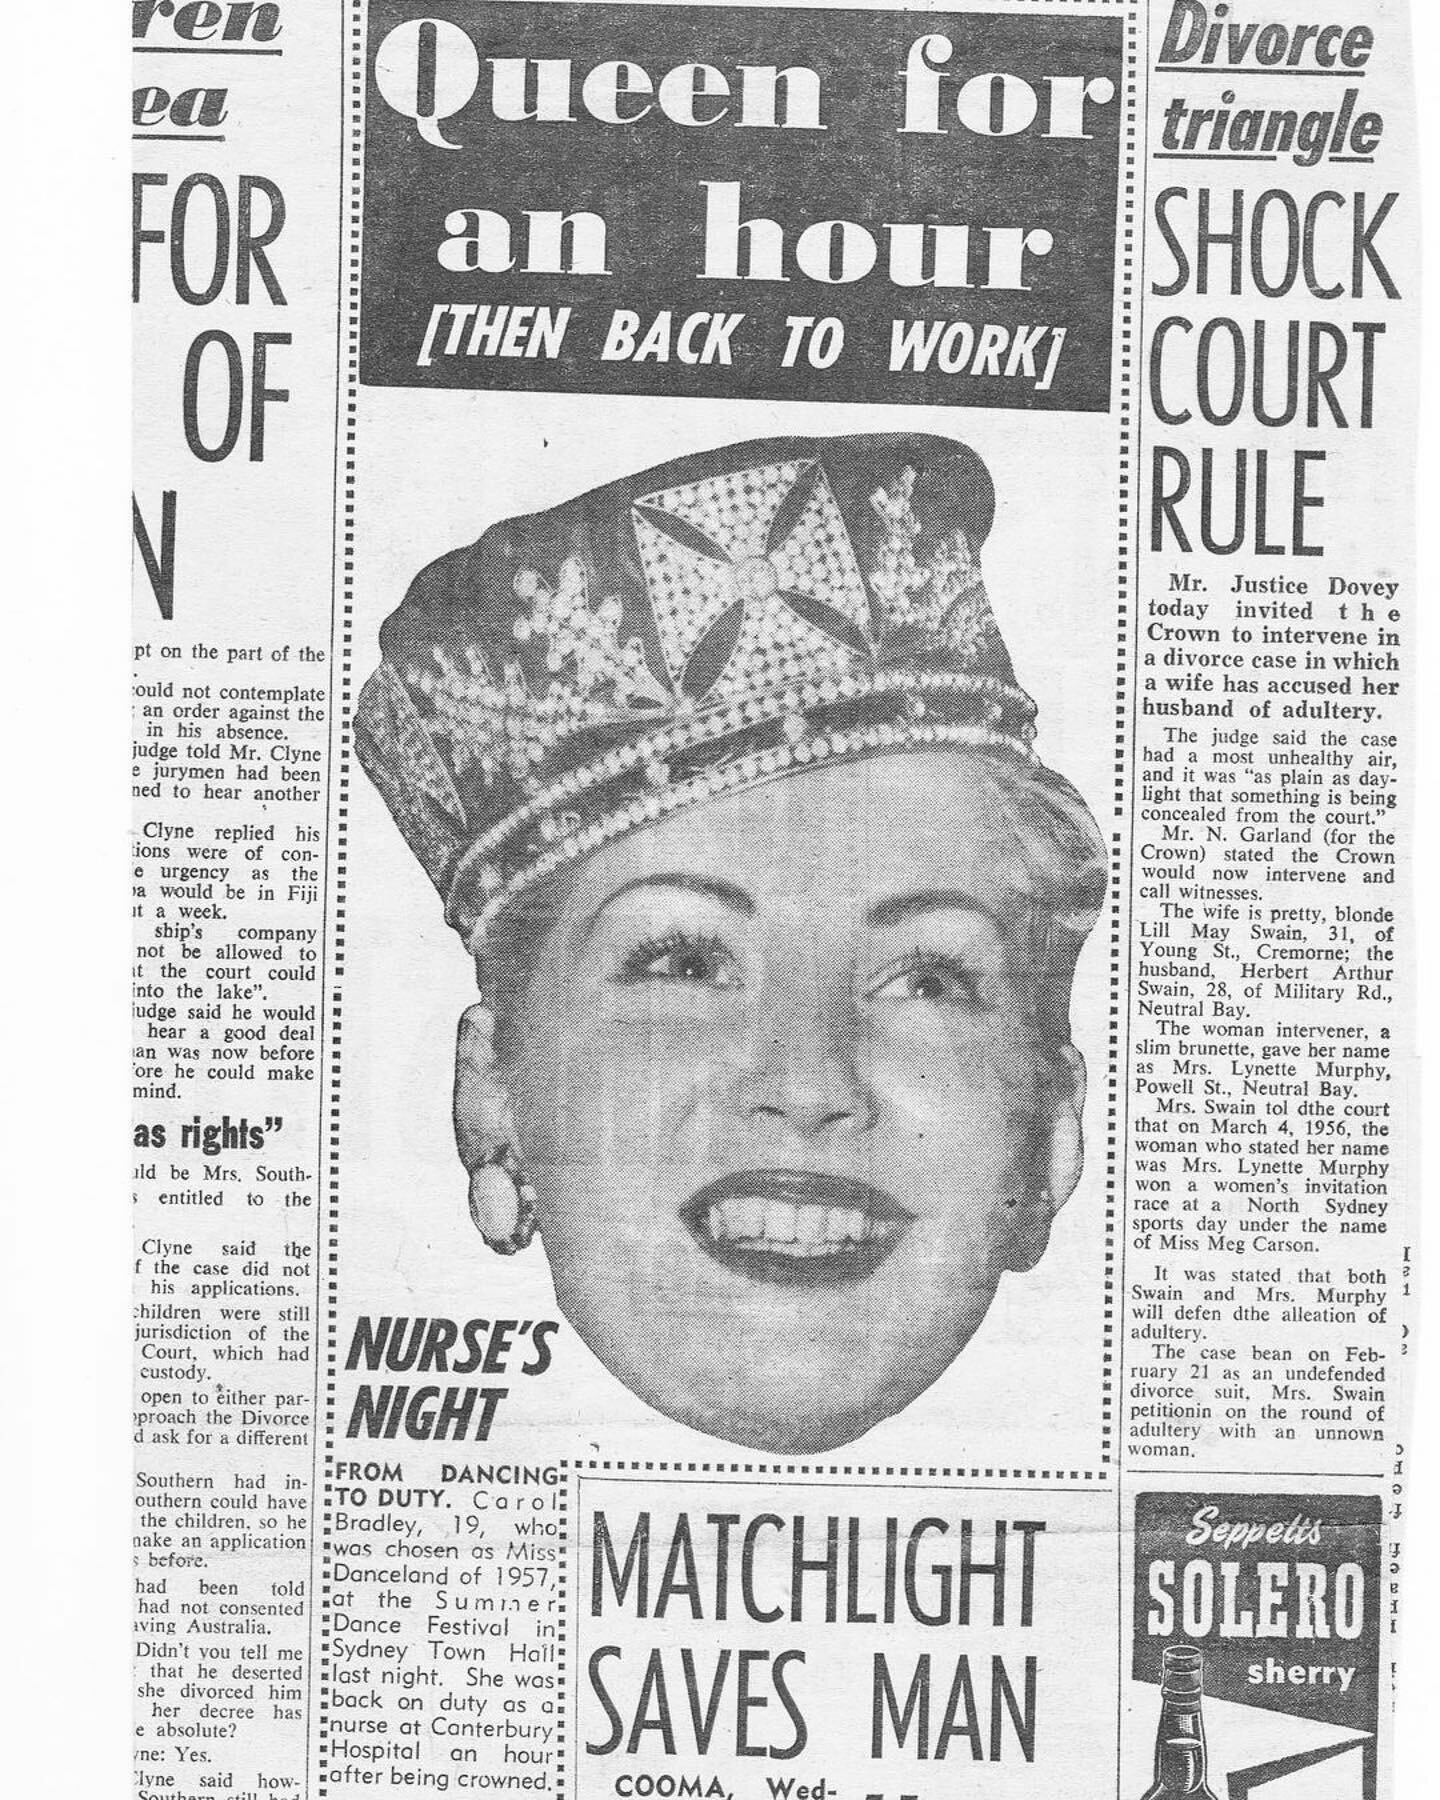 🔲 A shout out to my mum! Giving life to a new human is the ultimate creation, the ultimate blank canvas&hellip;thanks for everything mum ❤️ &ldquo;Coral Bradley, 19, who was chosen as Miss Danceland of 1957 at the Summer Dance Festival in Sydney Tow